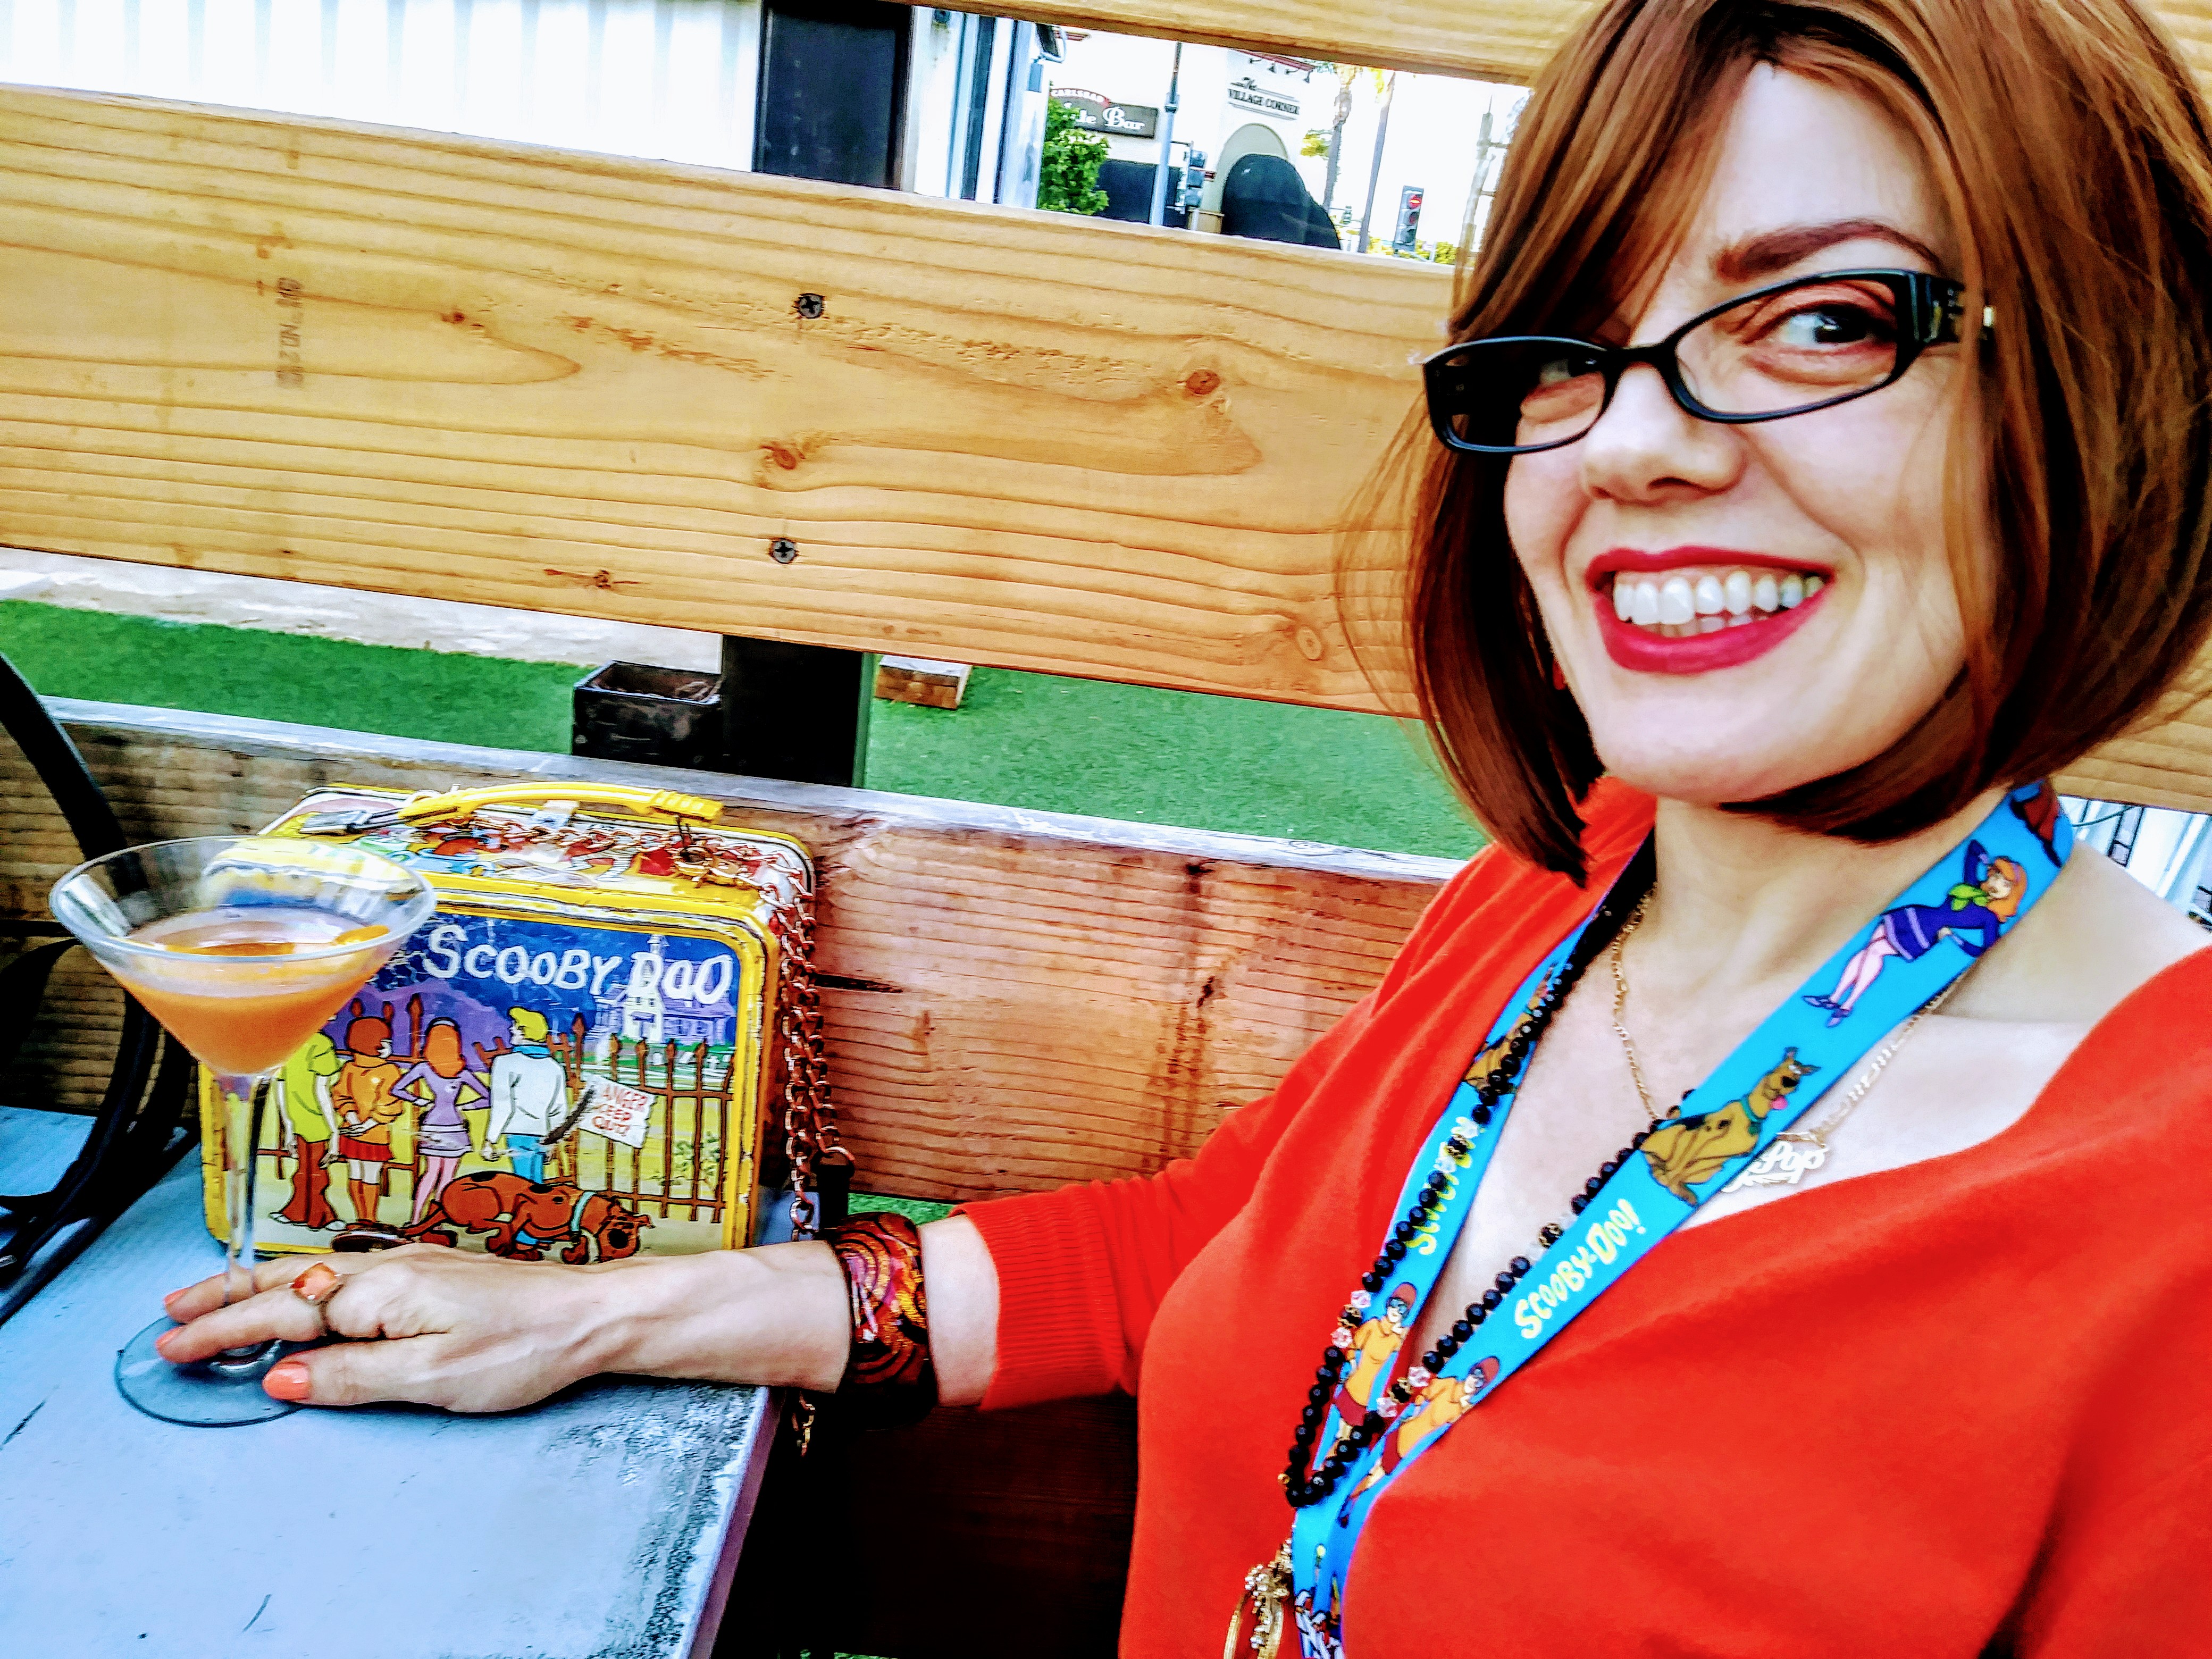 Jinkies! Somebody's been worked over! Glasses askew, Velma needs a cocktail after all that San Diego ghost hunting. Photo: JSDevore, SDCC 2019